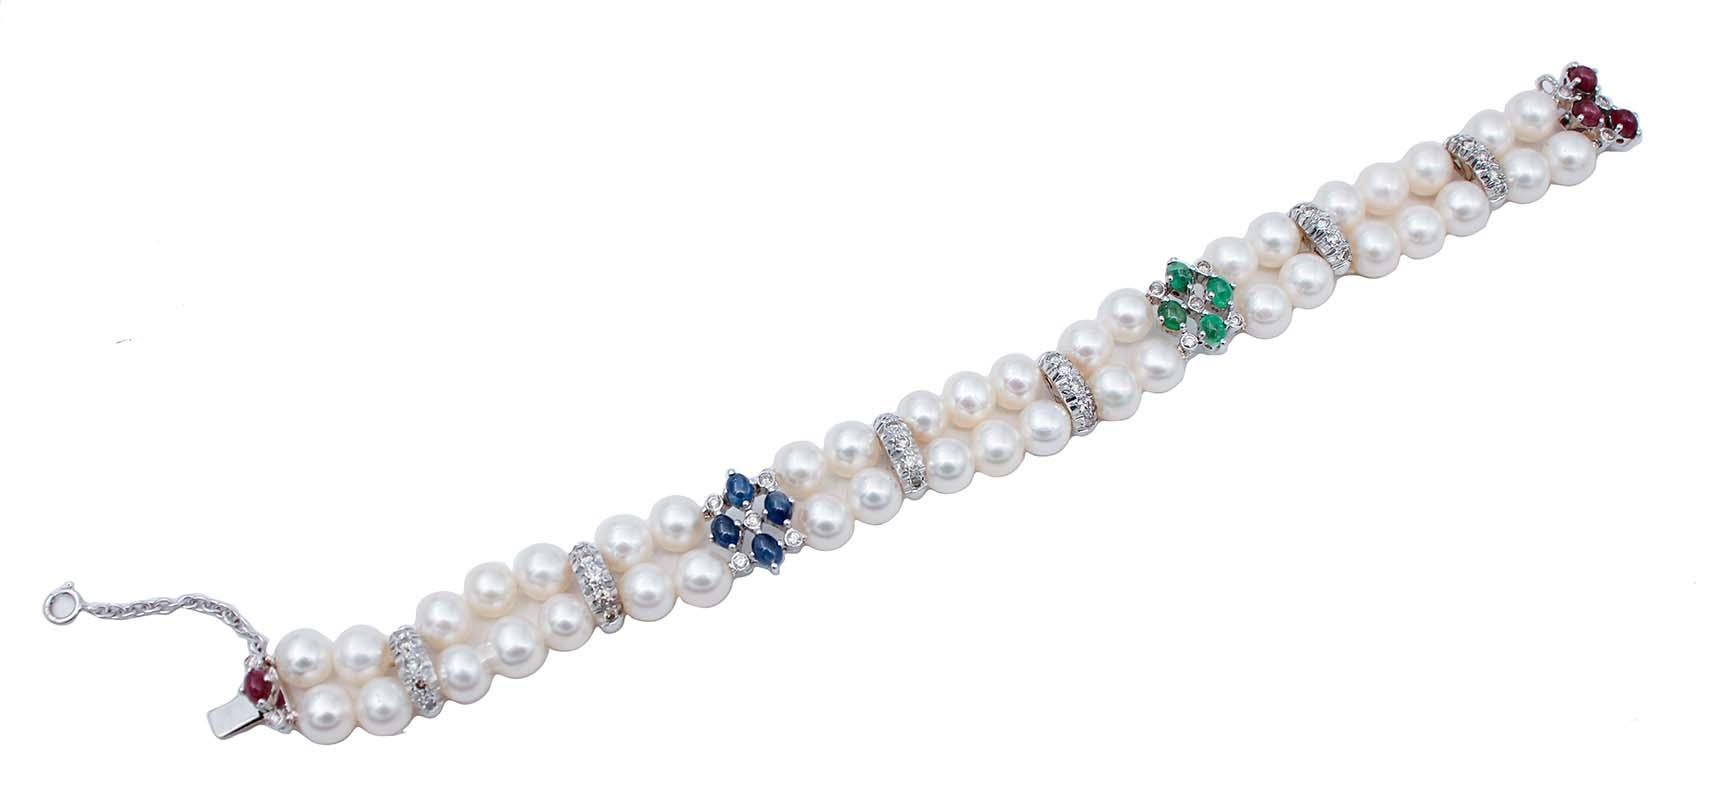 SHIPPING POLICY: 
No additional costs will be added to this order. 
Shipping costs will be totally covered by the seller (customs duties included).

Amazing beaded bracelet in 14 karat white gold structure mounted with two rows of pearls and,between